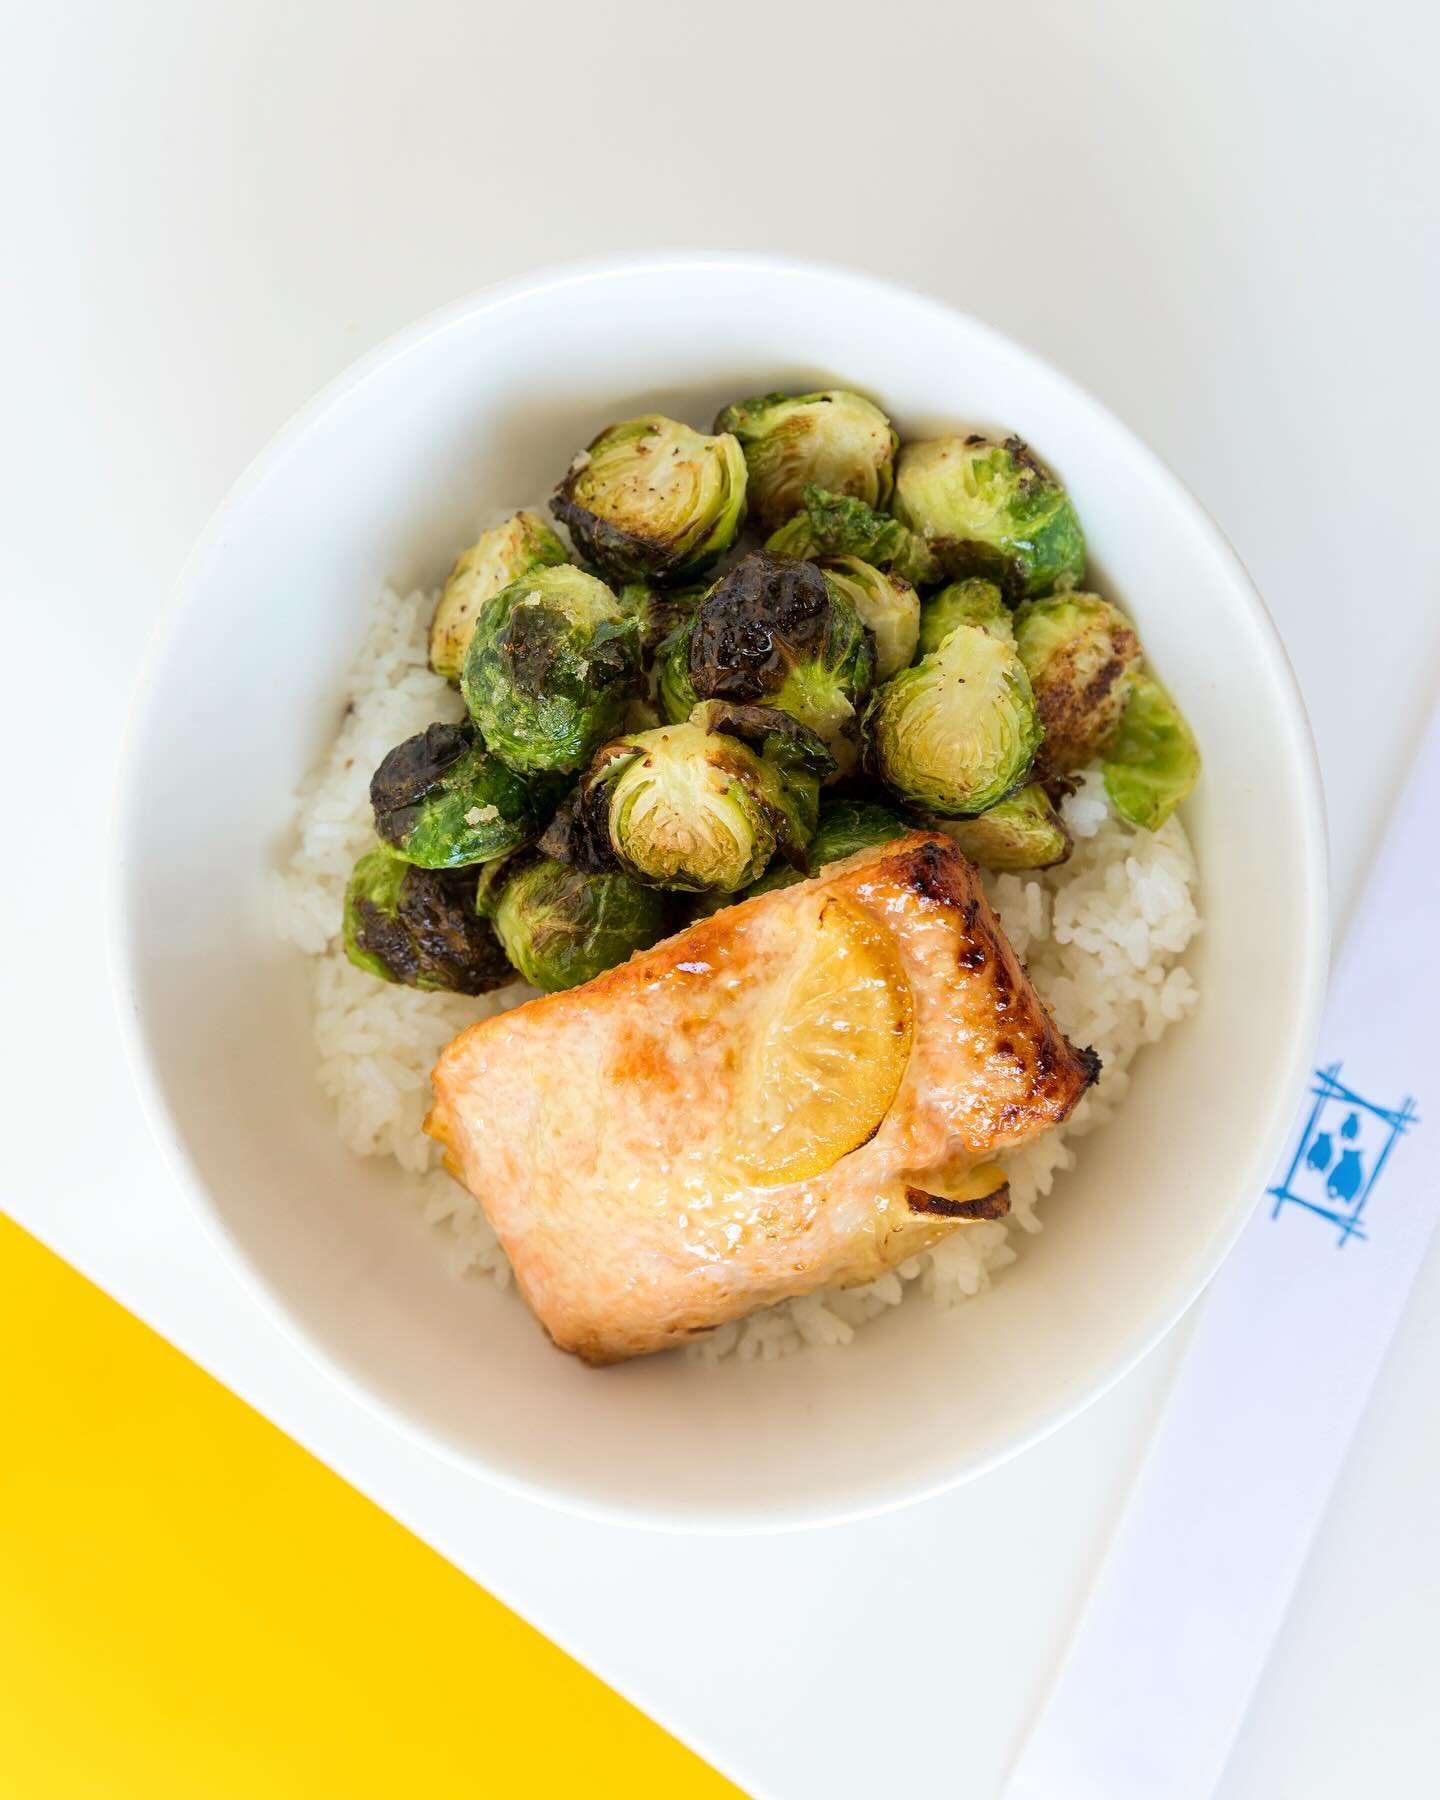 Healthy, hearty and full of umami with our miso salmon bowl. 🐟 Order yours now for lunch! Musubisquare.com✨

📍2626 W La Palma Ave, Anaheim, CA
⏰ 10A-8:30P
#musubisquare